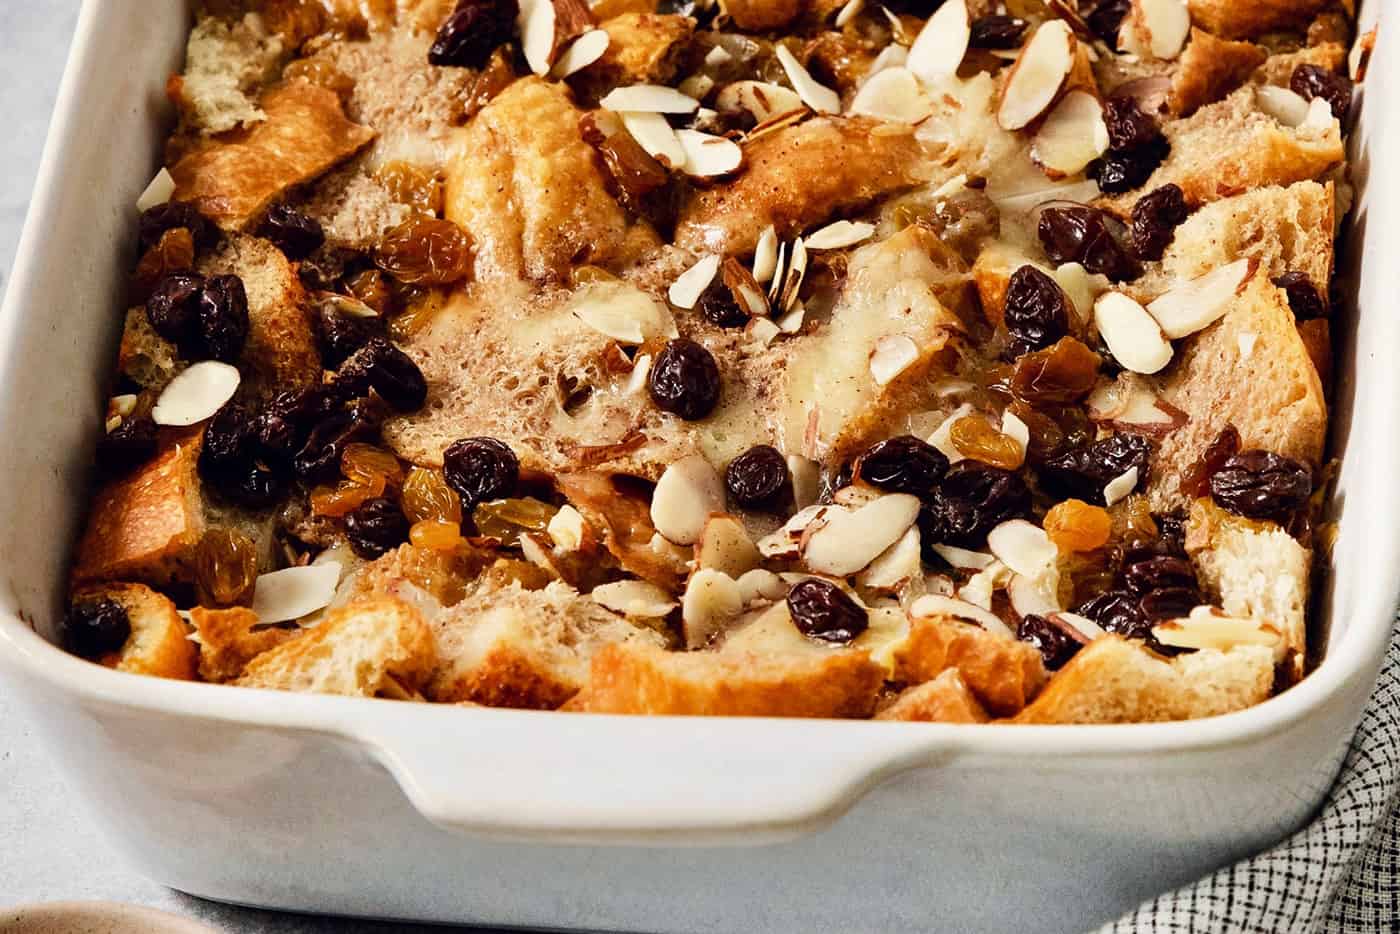 A baking dish full of capirotada topped with raisins and almonds.